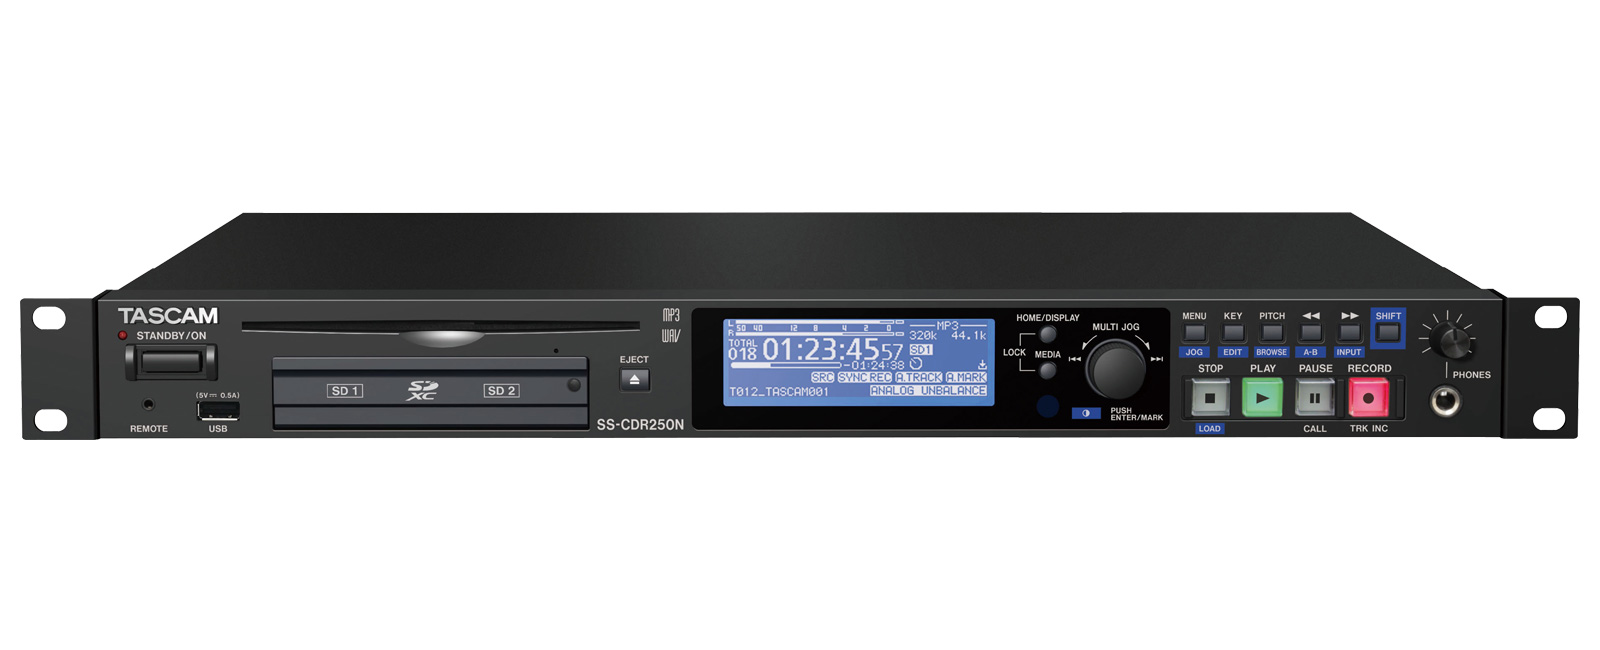 SS-CDR250N and SS-R250N - New Upgraded Version 2.10 of Firmware Released